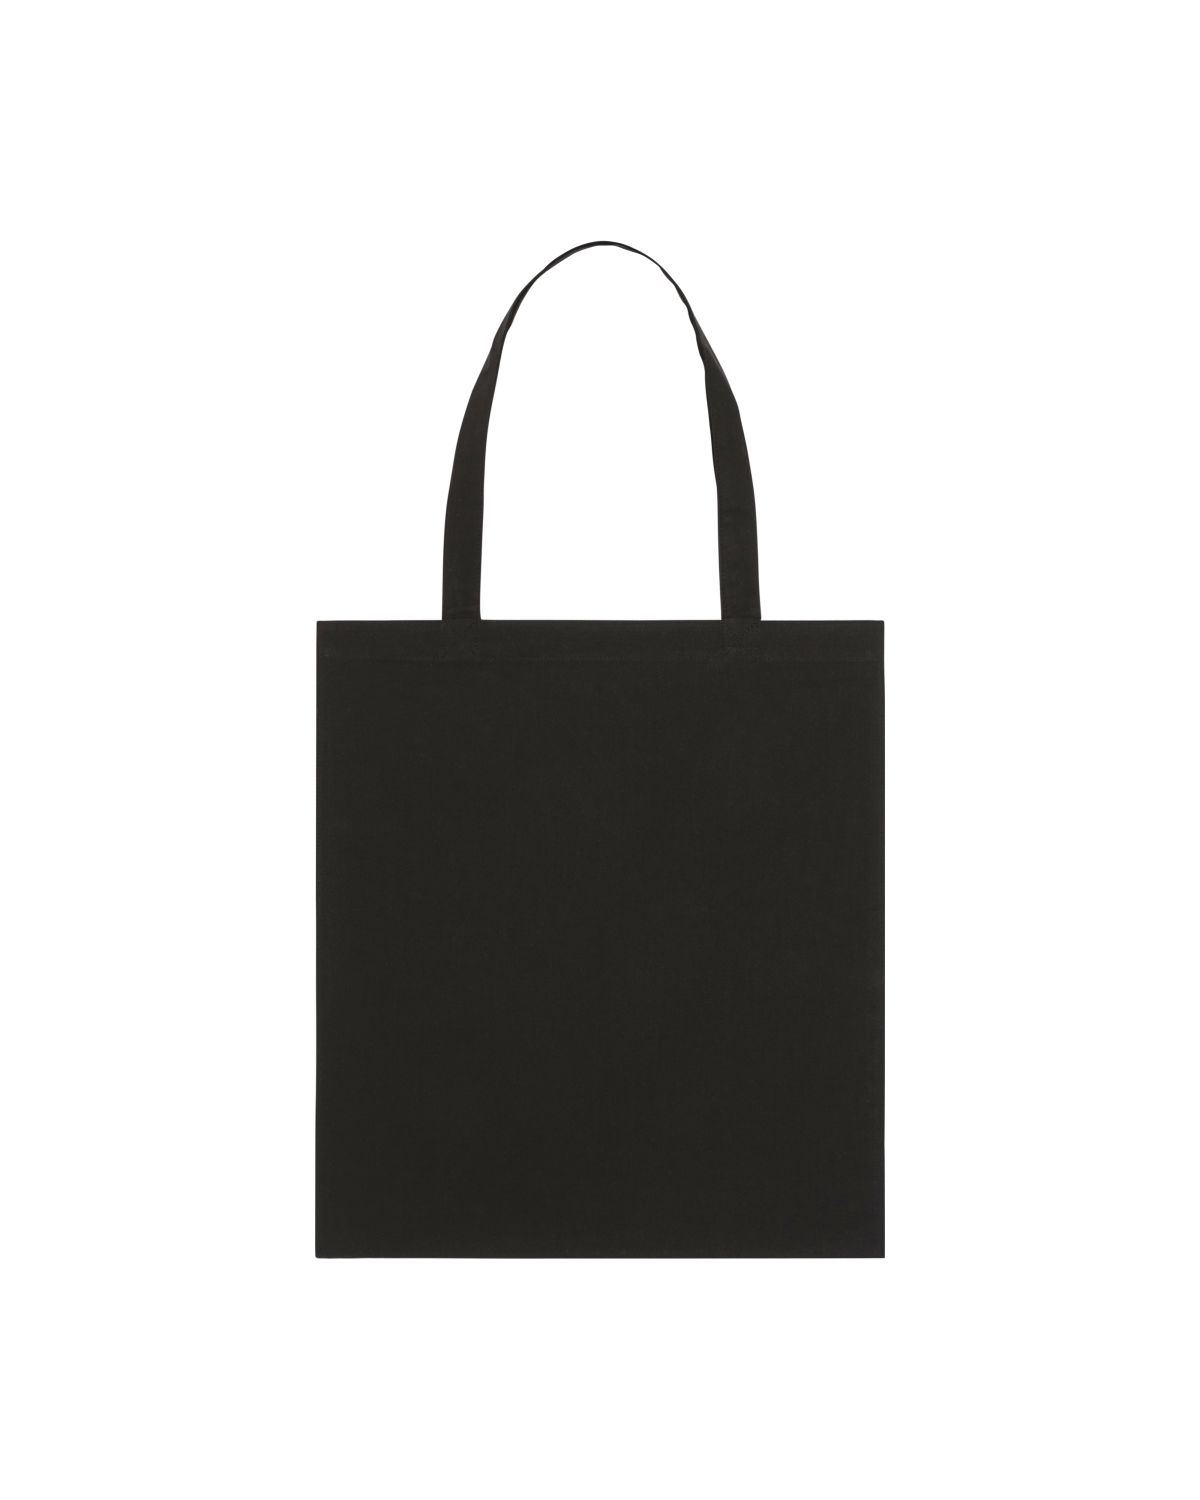 Customize your own sustainable tote bag made of 100% GOTS-certified organic cotton.